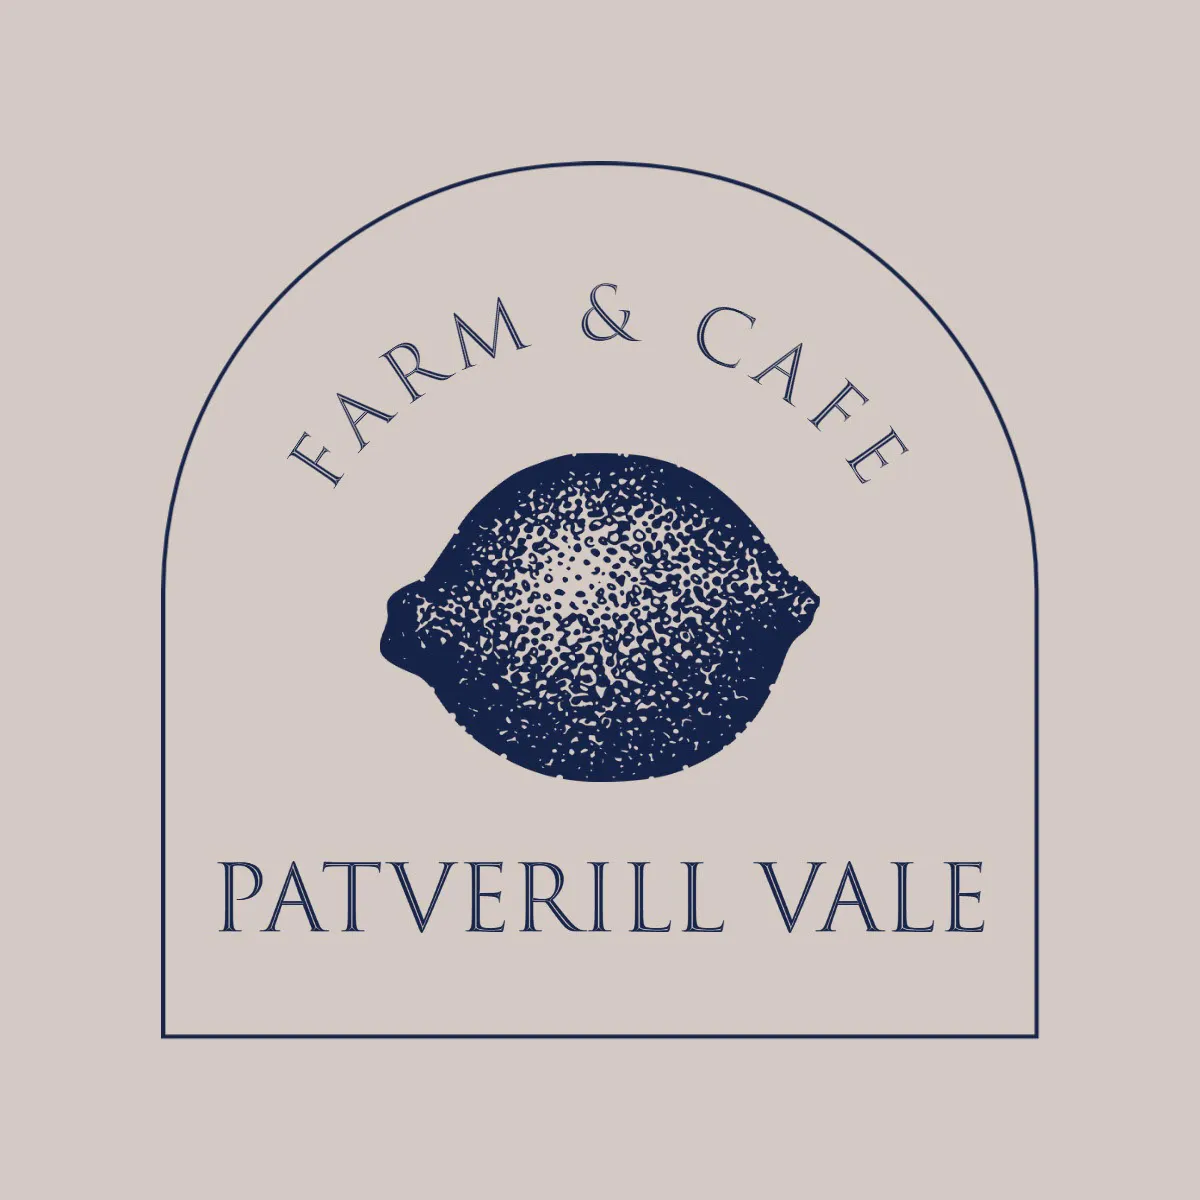 Navy and Beige Farm and Cafe Logo